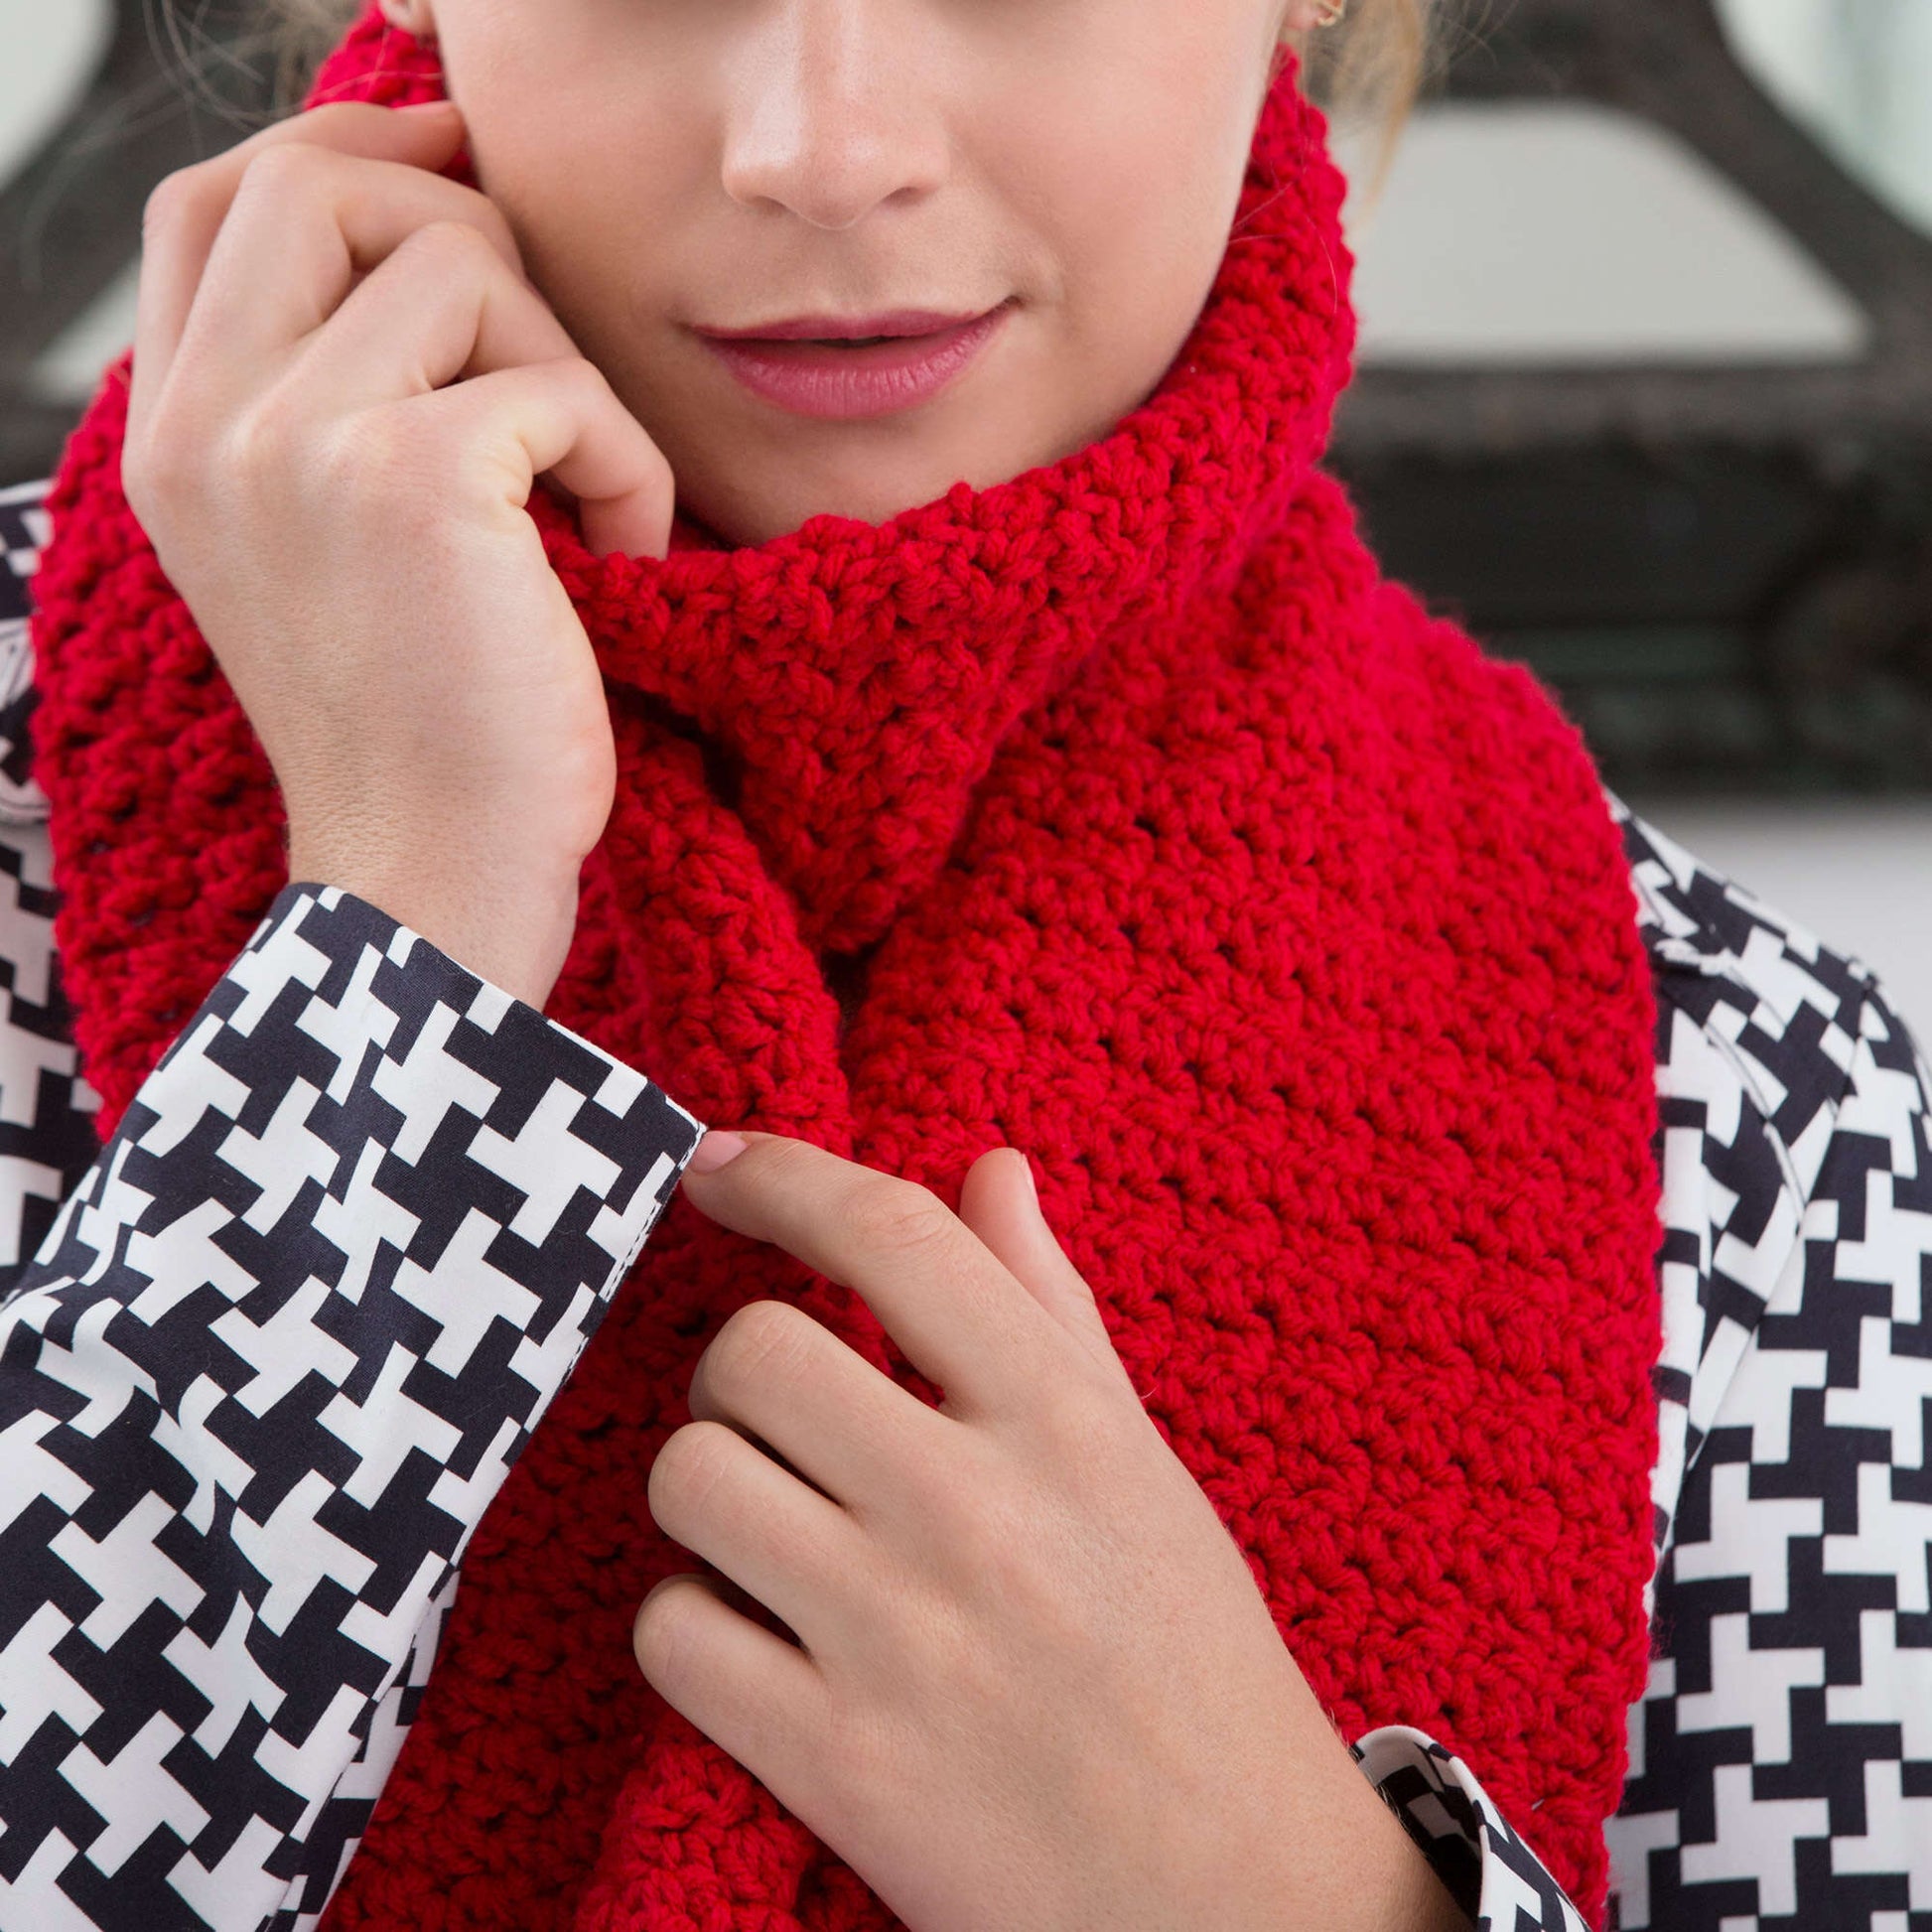 Windswept Scarf~FREE Crochet Pattern, featuring Red Heart with Love Stripes  yarn! - Trifles & Treasures